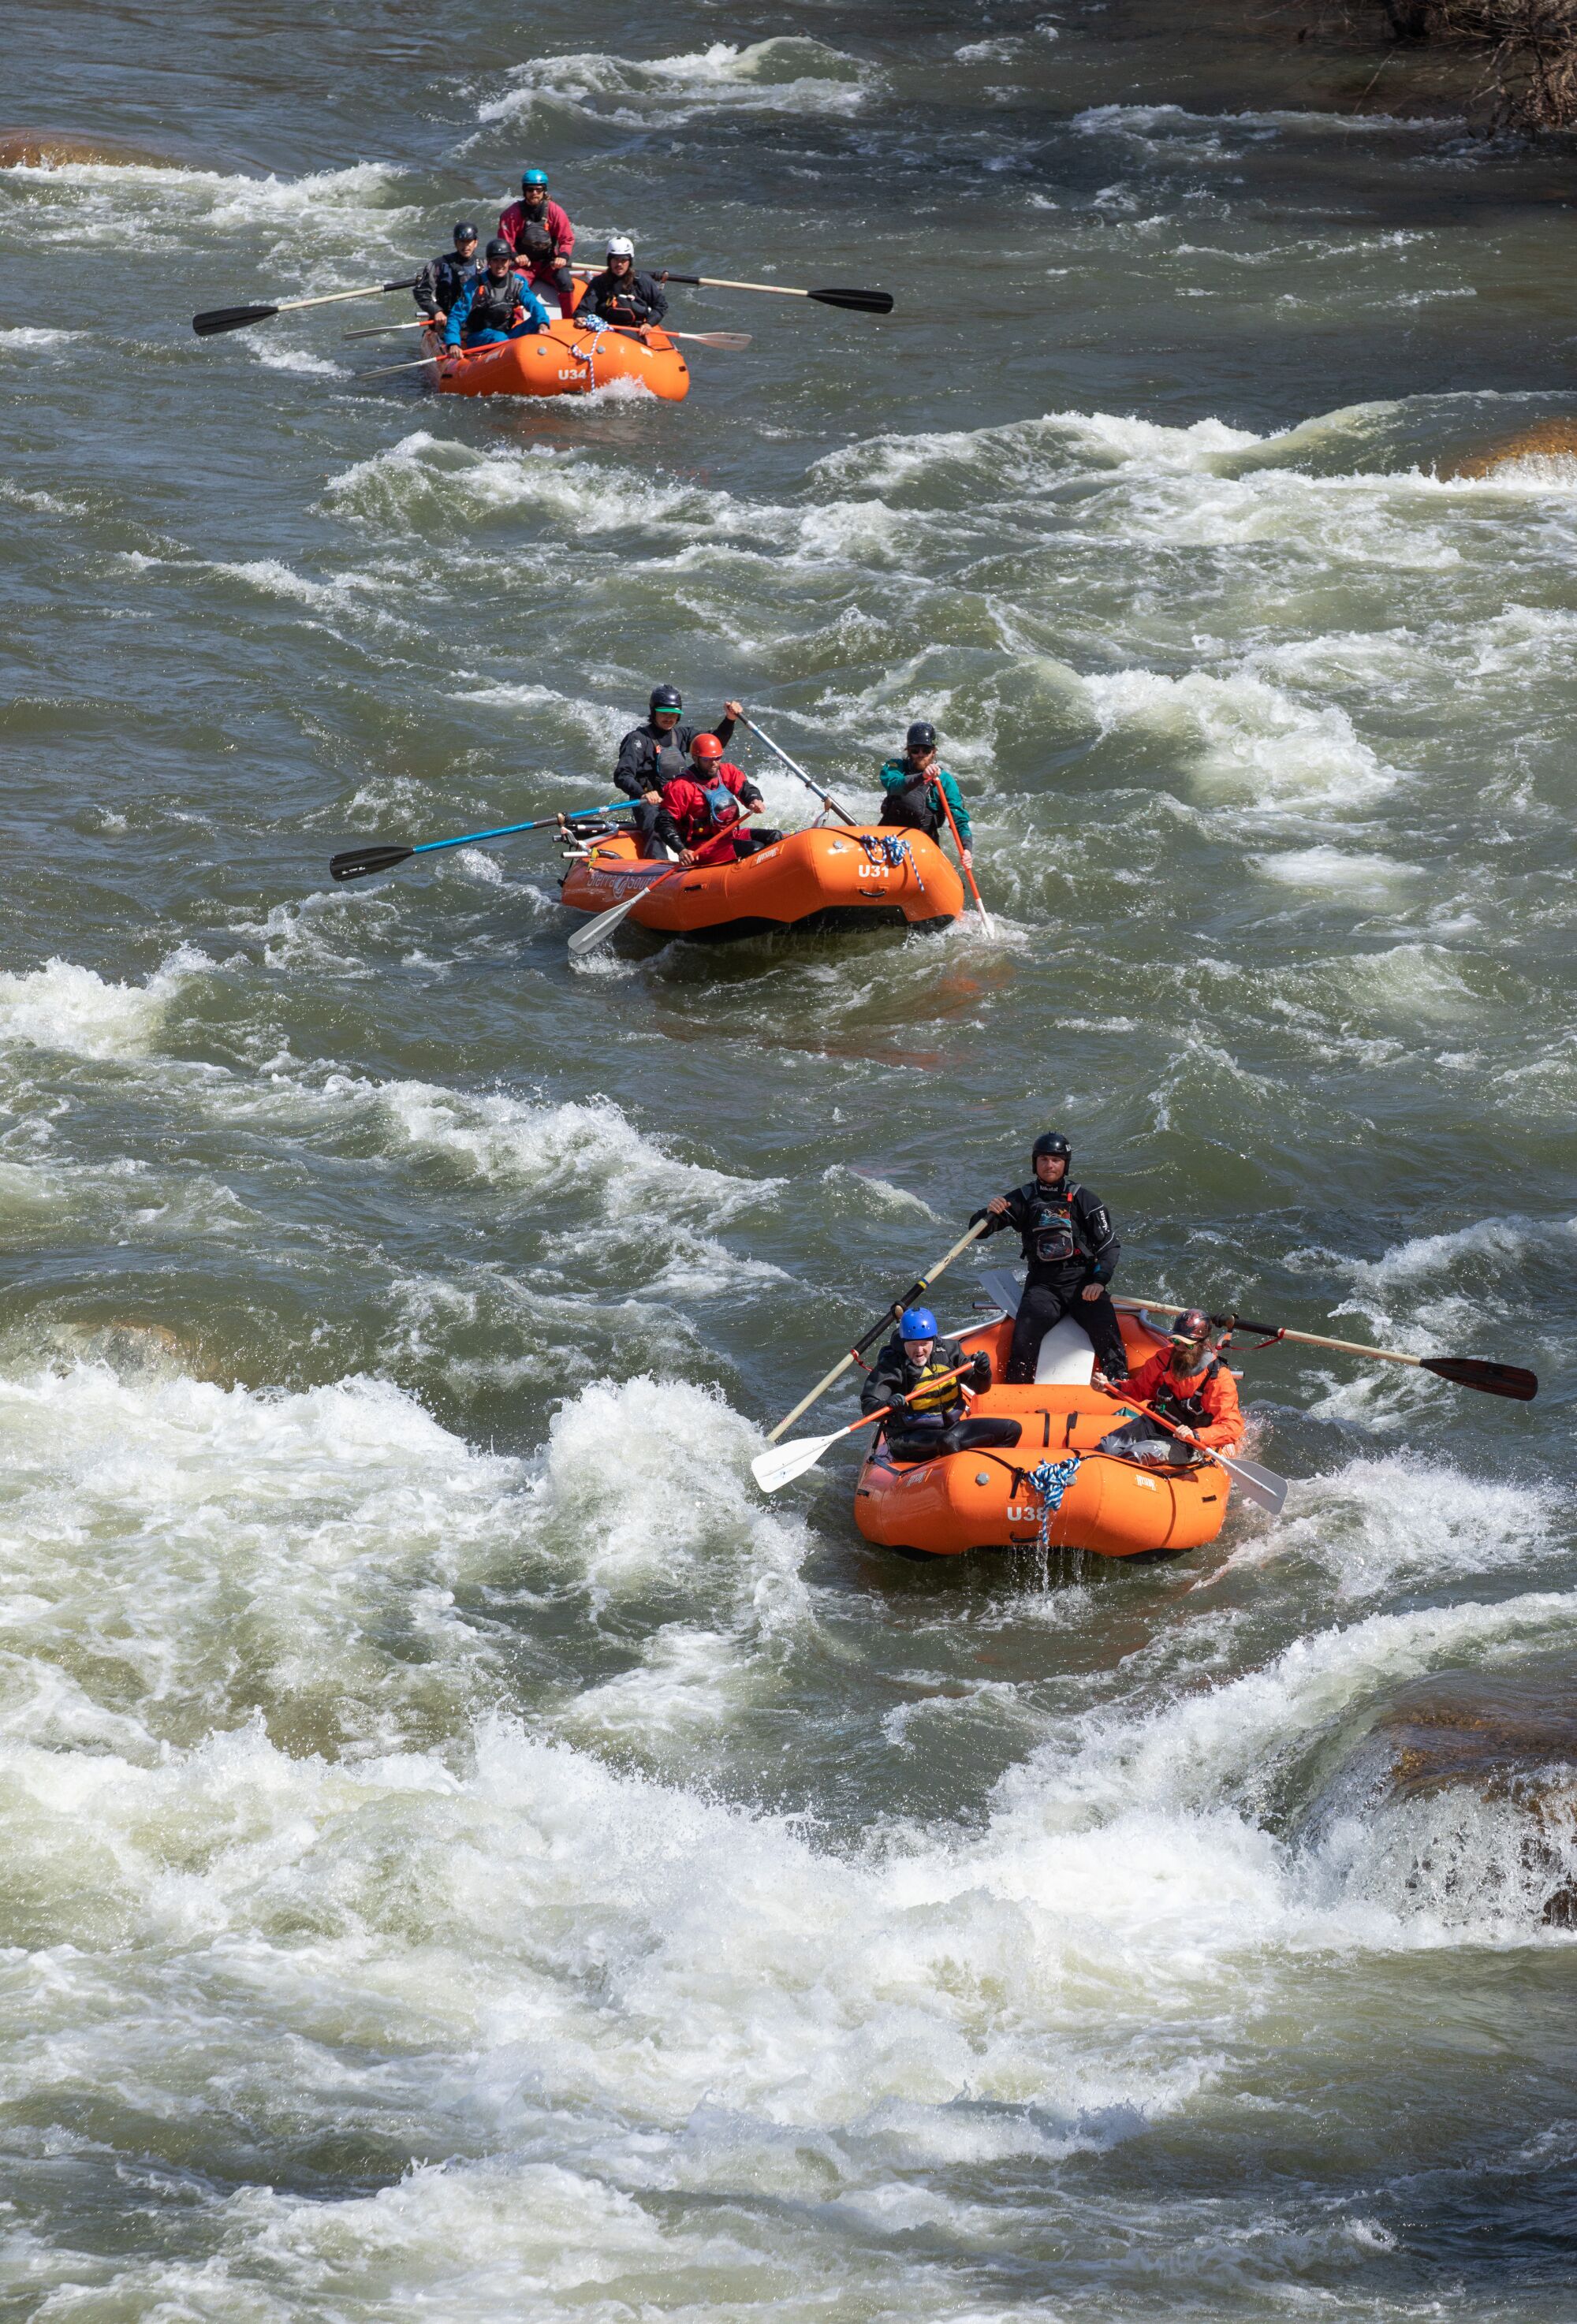 Los Angeles Times reporter Jack Dolan helps guide his raft through the turbulent waters of the Upper Kern River.